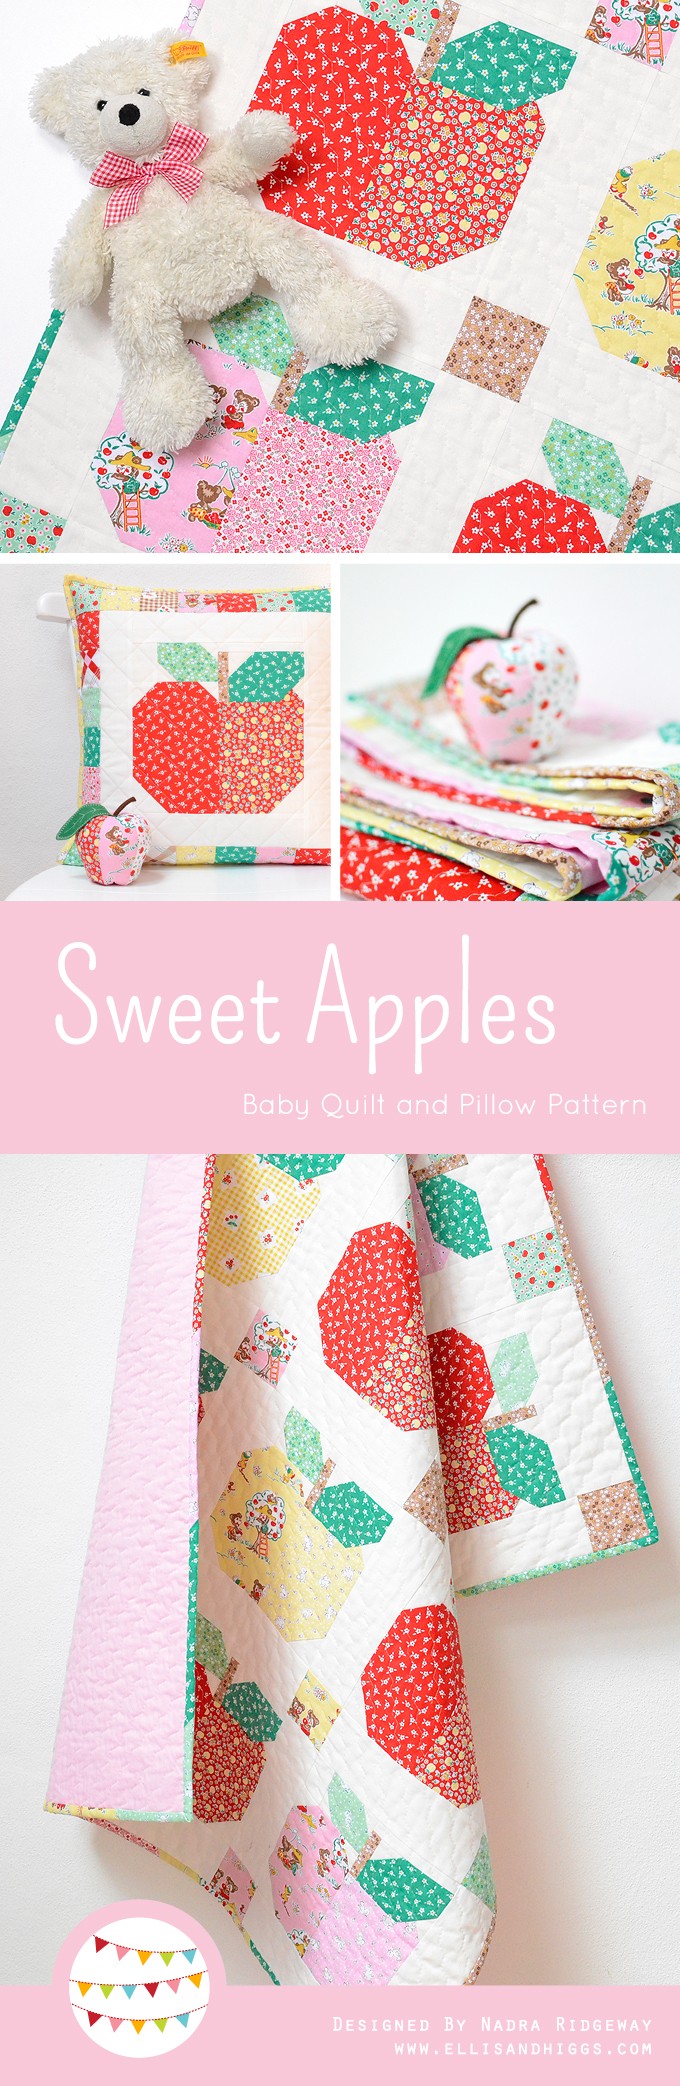 Sweet Apples Baby Quilt and Pillow Pattern by Nadra Ridgeway